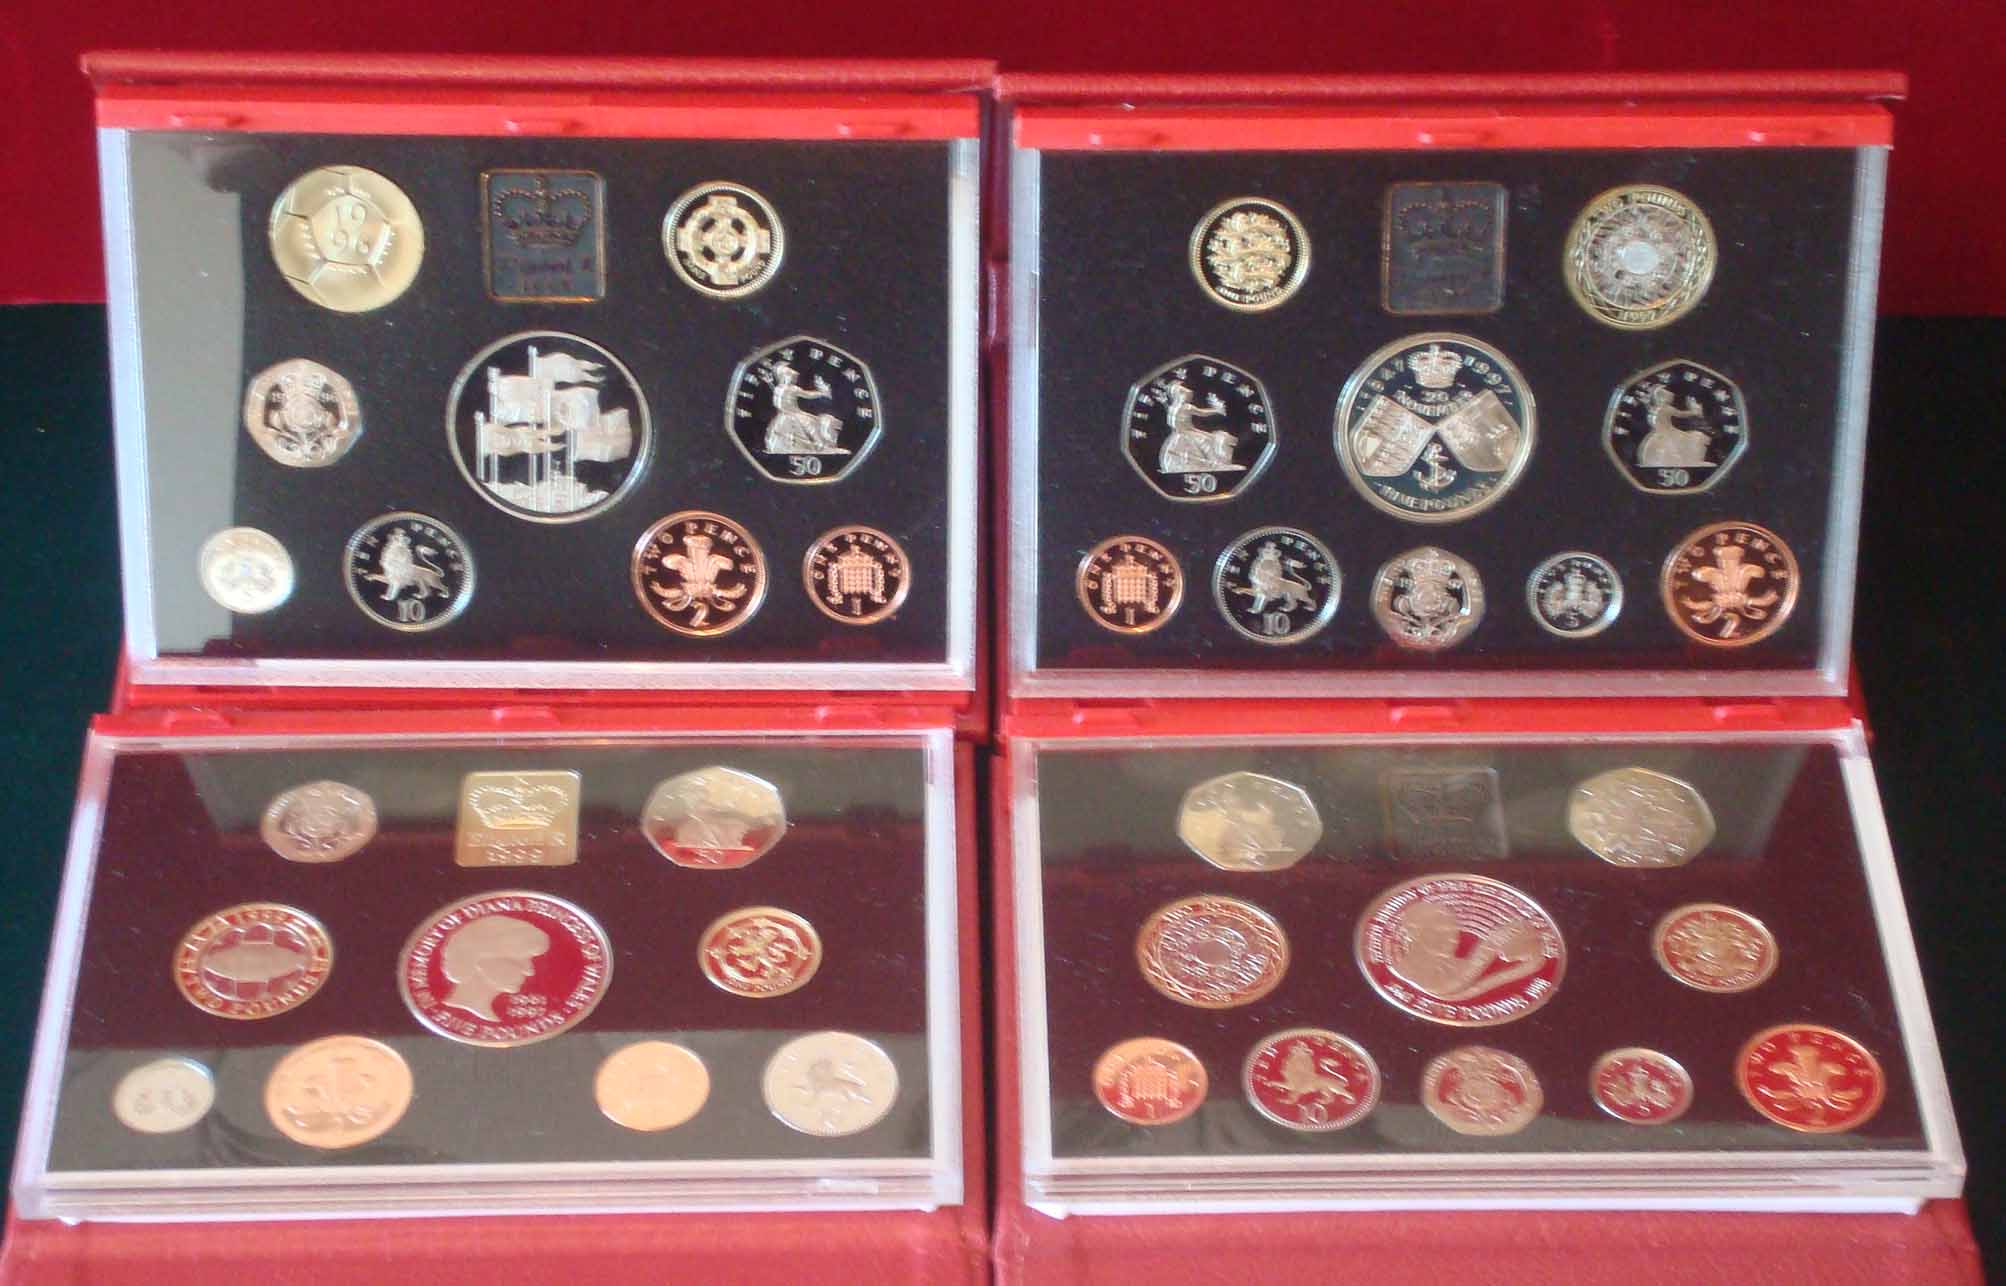 1996 – 1999 United Kingdom Proof Coin Collection: Coin set in original plastic case within a Red